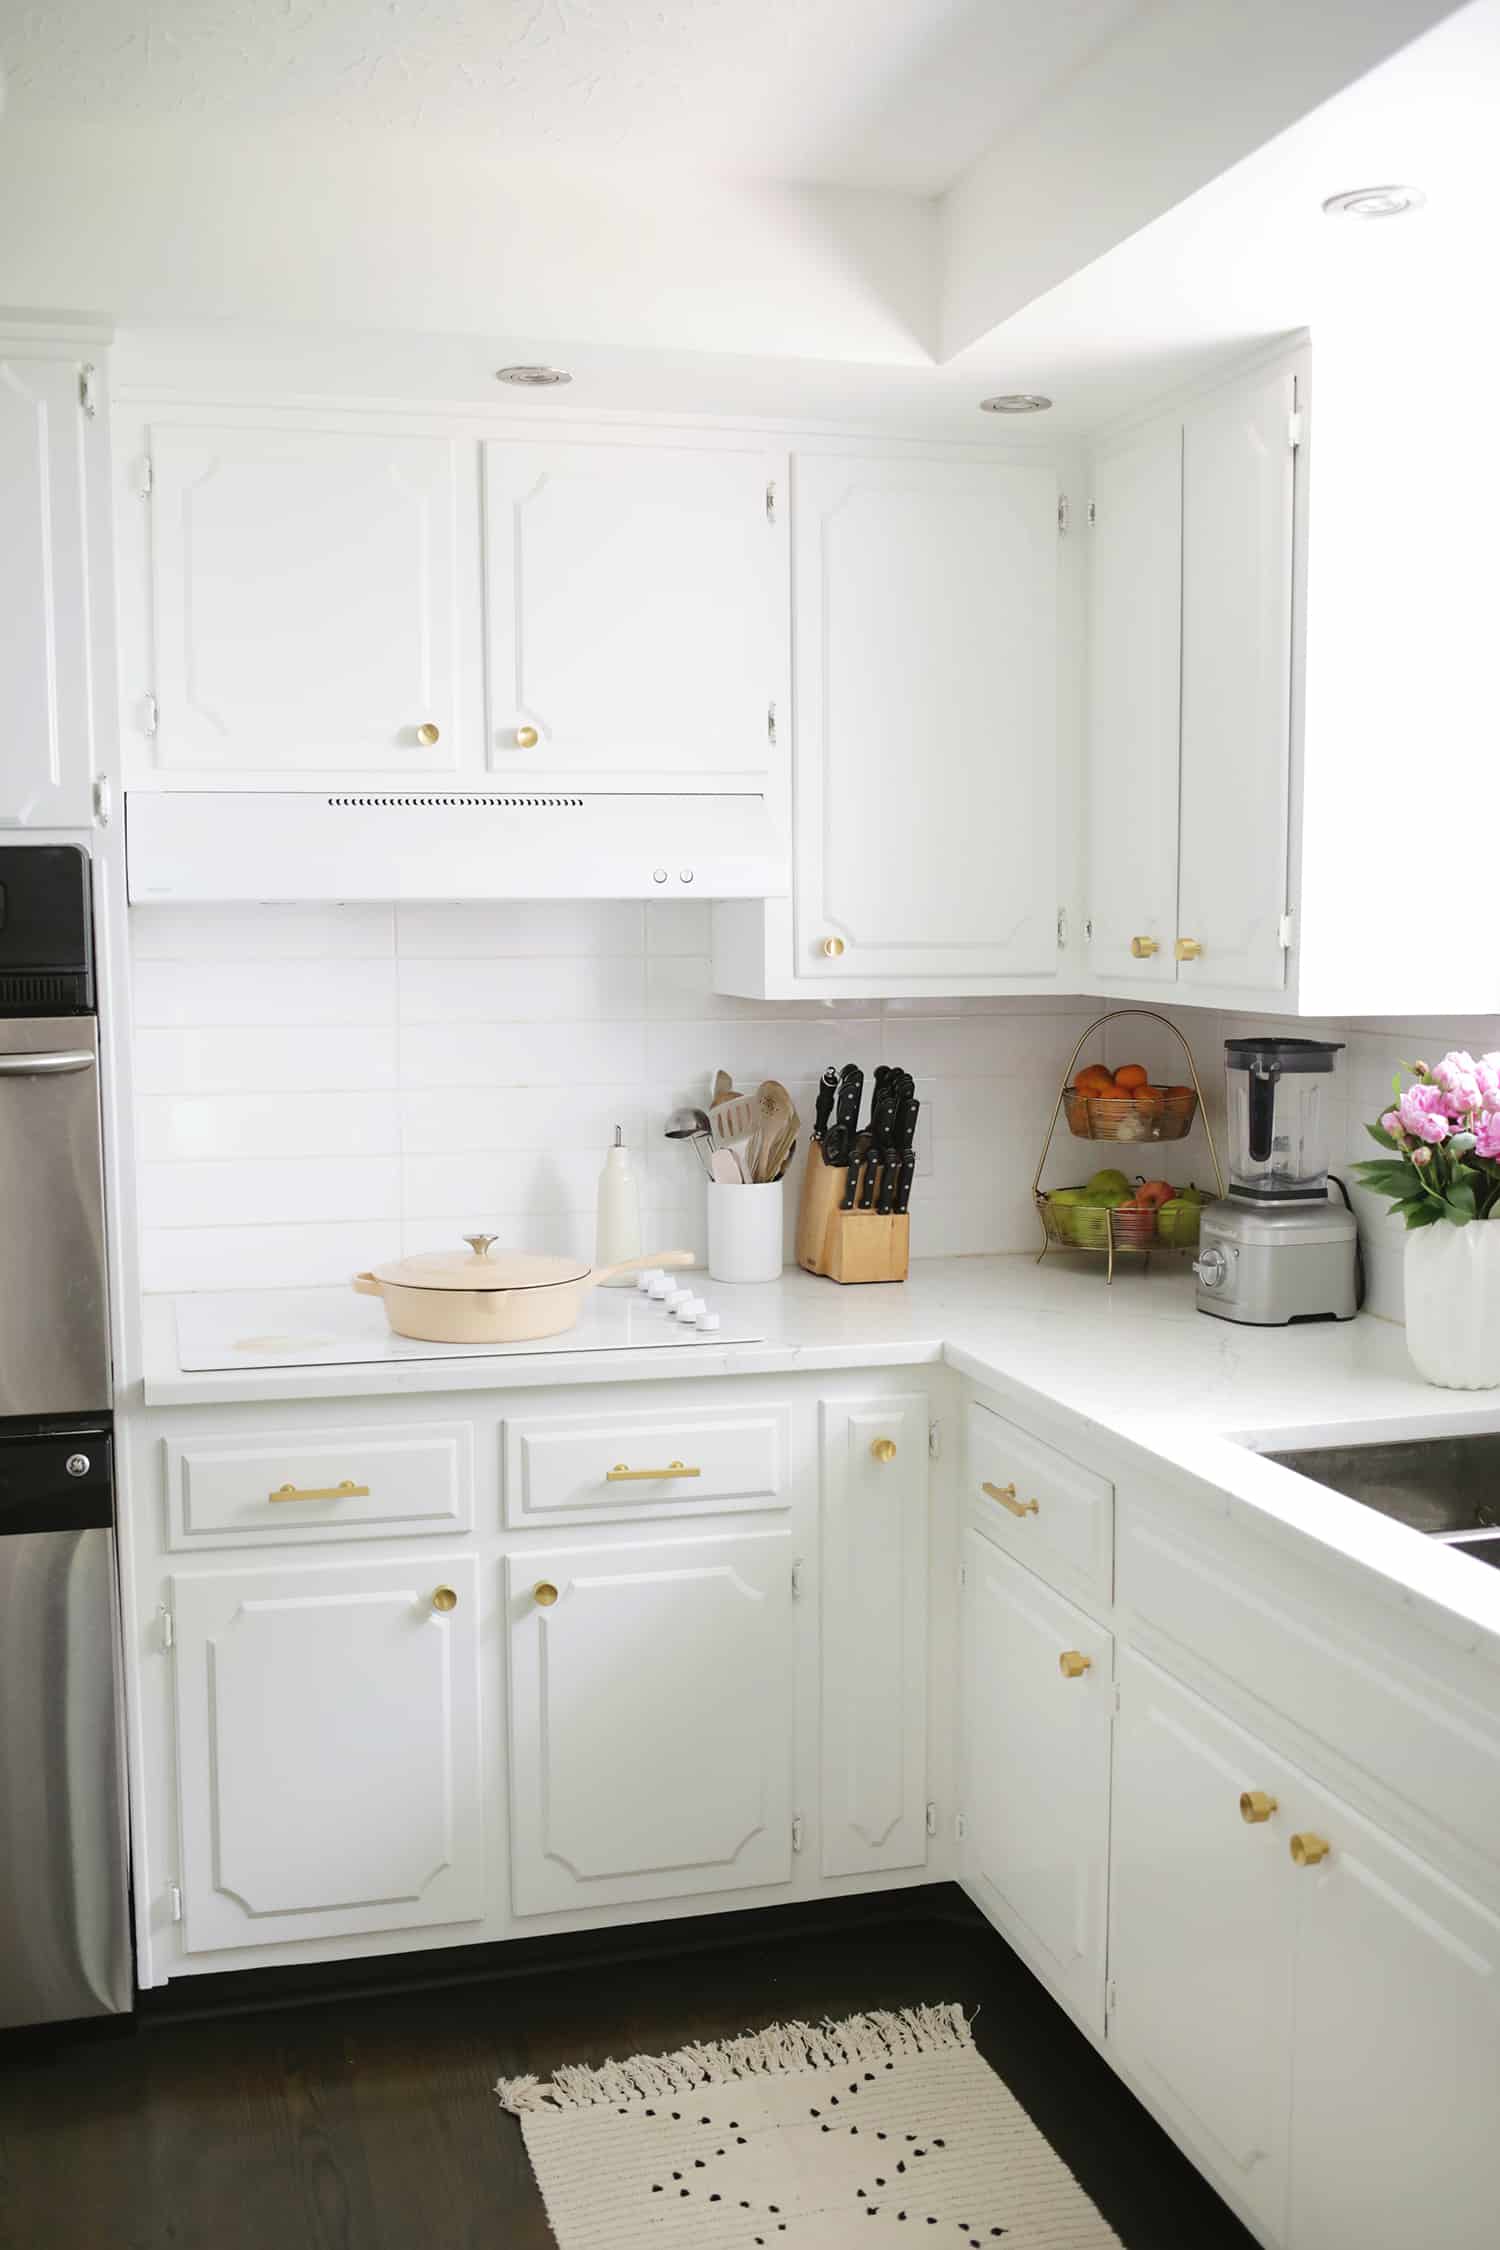 wider view of white kitchen with gold handles